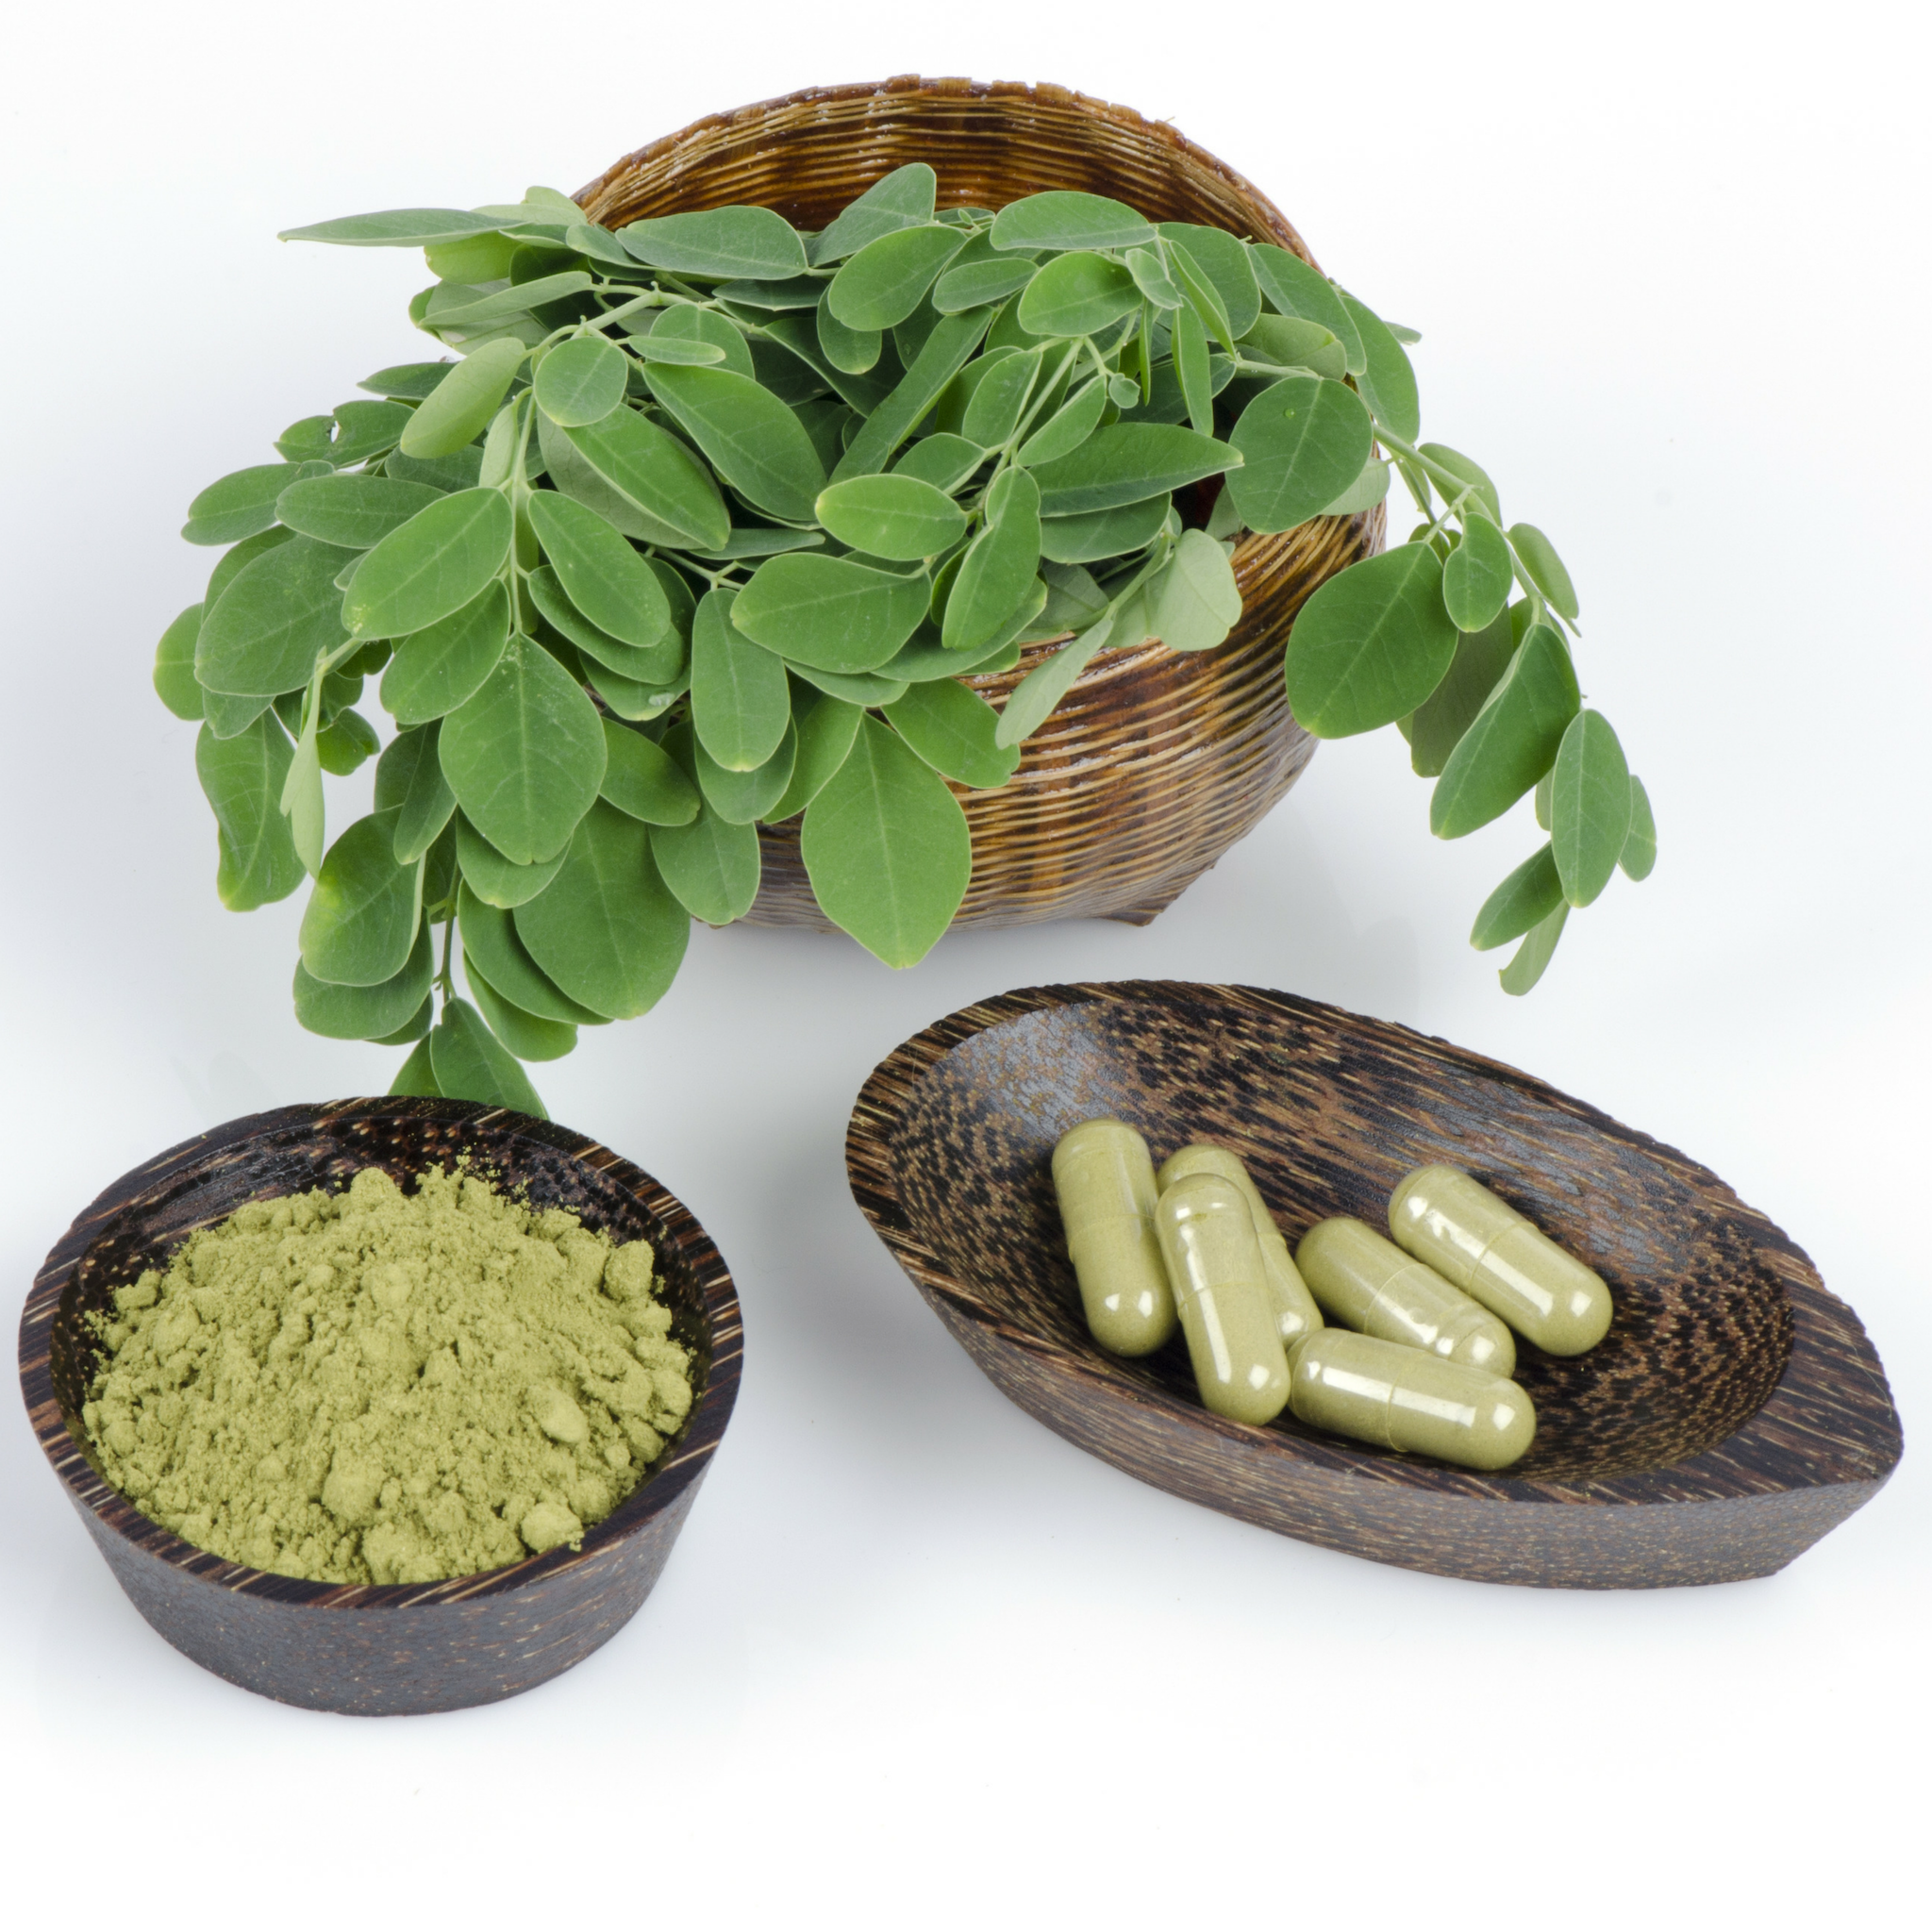 Information about the Moringa leaves effects on your health and Top medical benefits-All Moringa